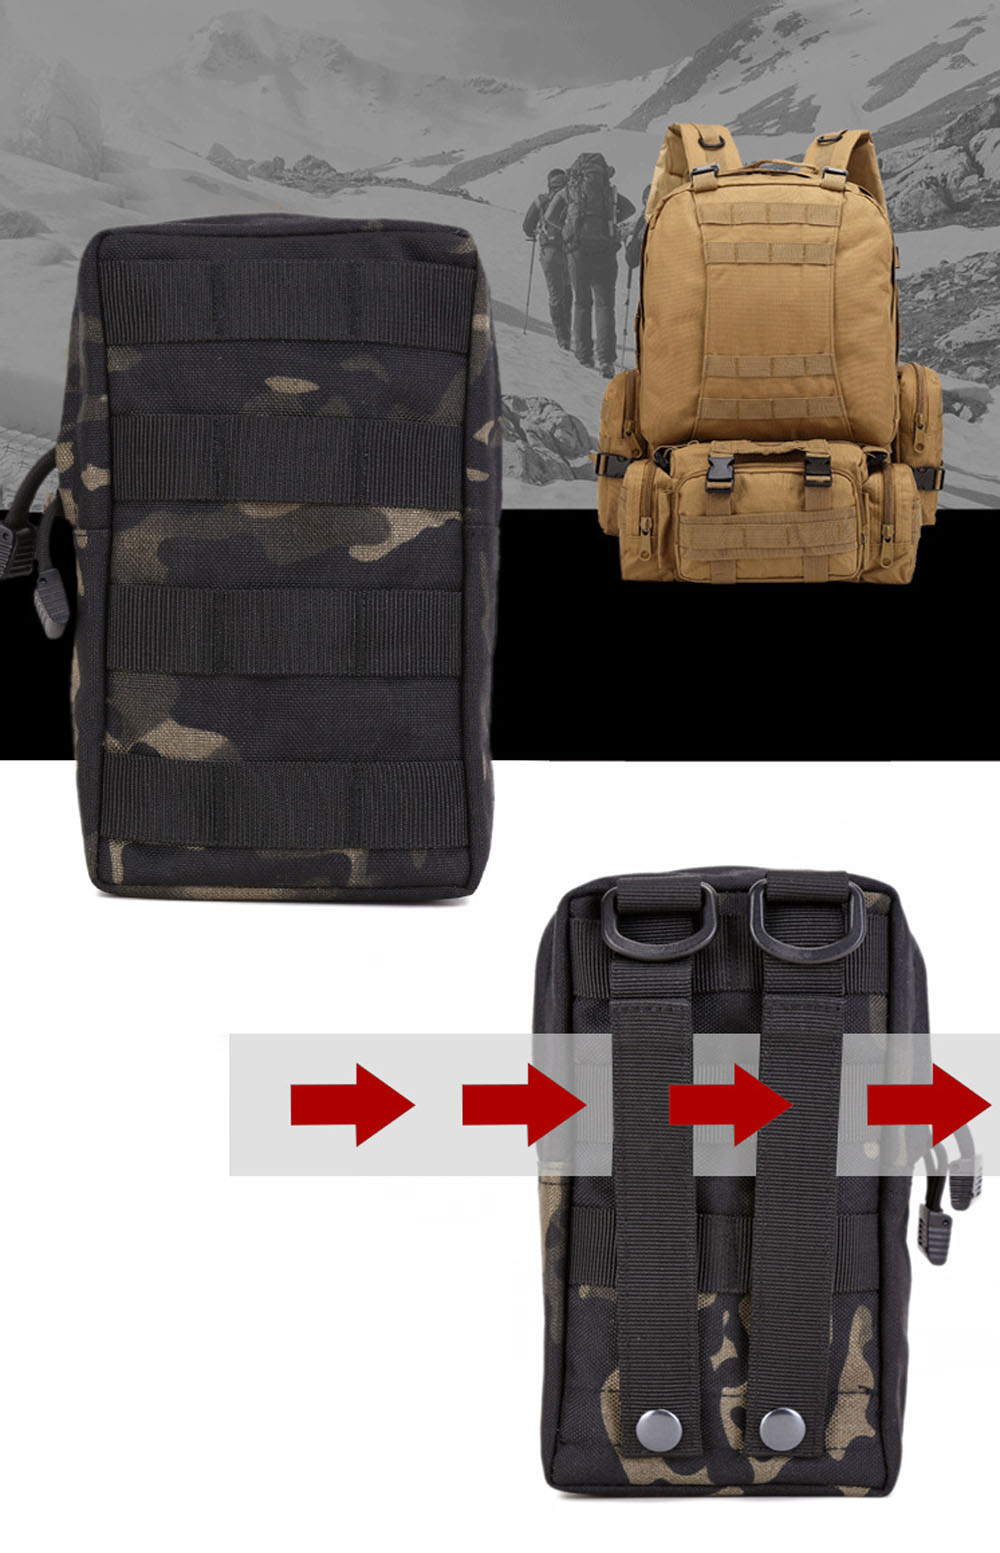 1000D-Tactical-Molle-Pouch-Military-Waist-Bag-Outdoor-Men-EDC-Tool-Bag--Walkie-Talkie-Pack-Mobile-Ph-1849794-1